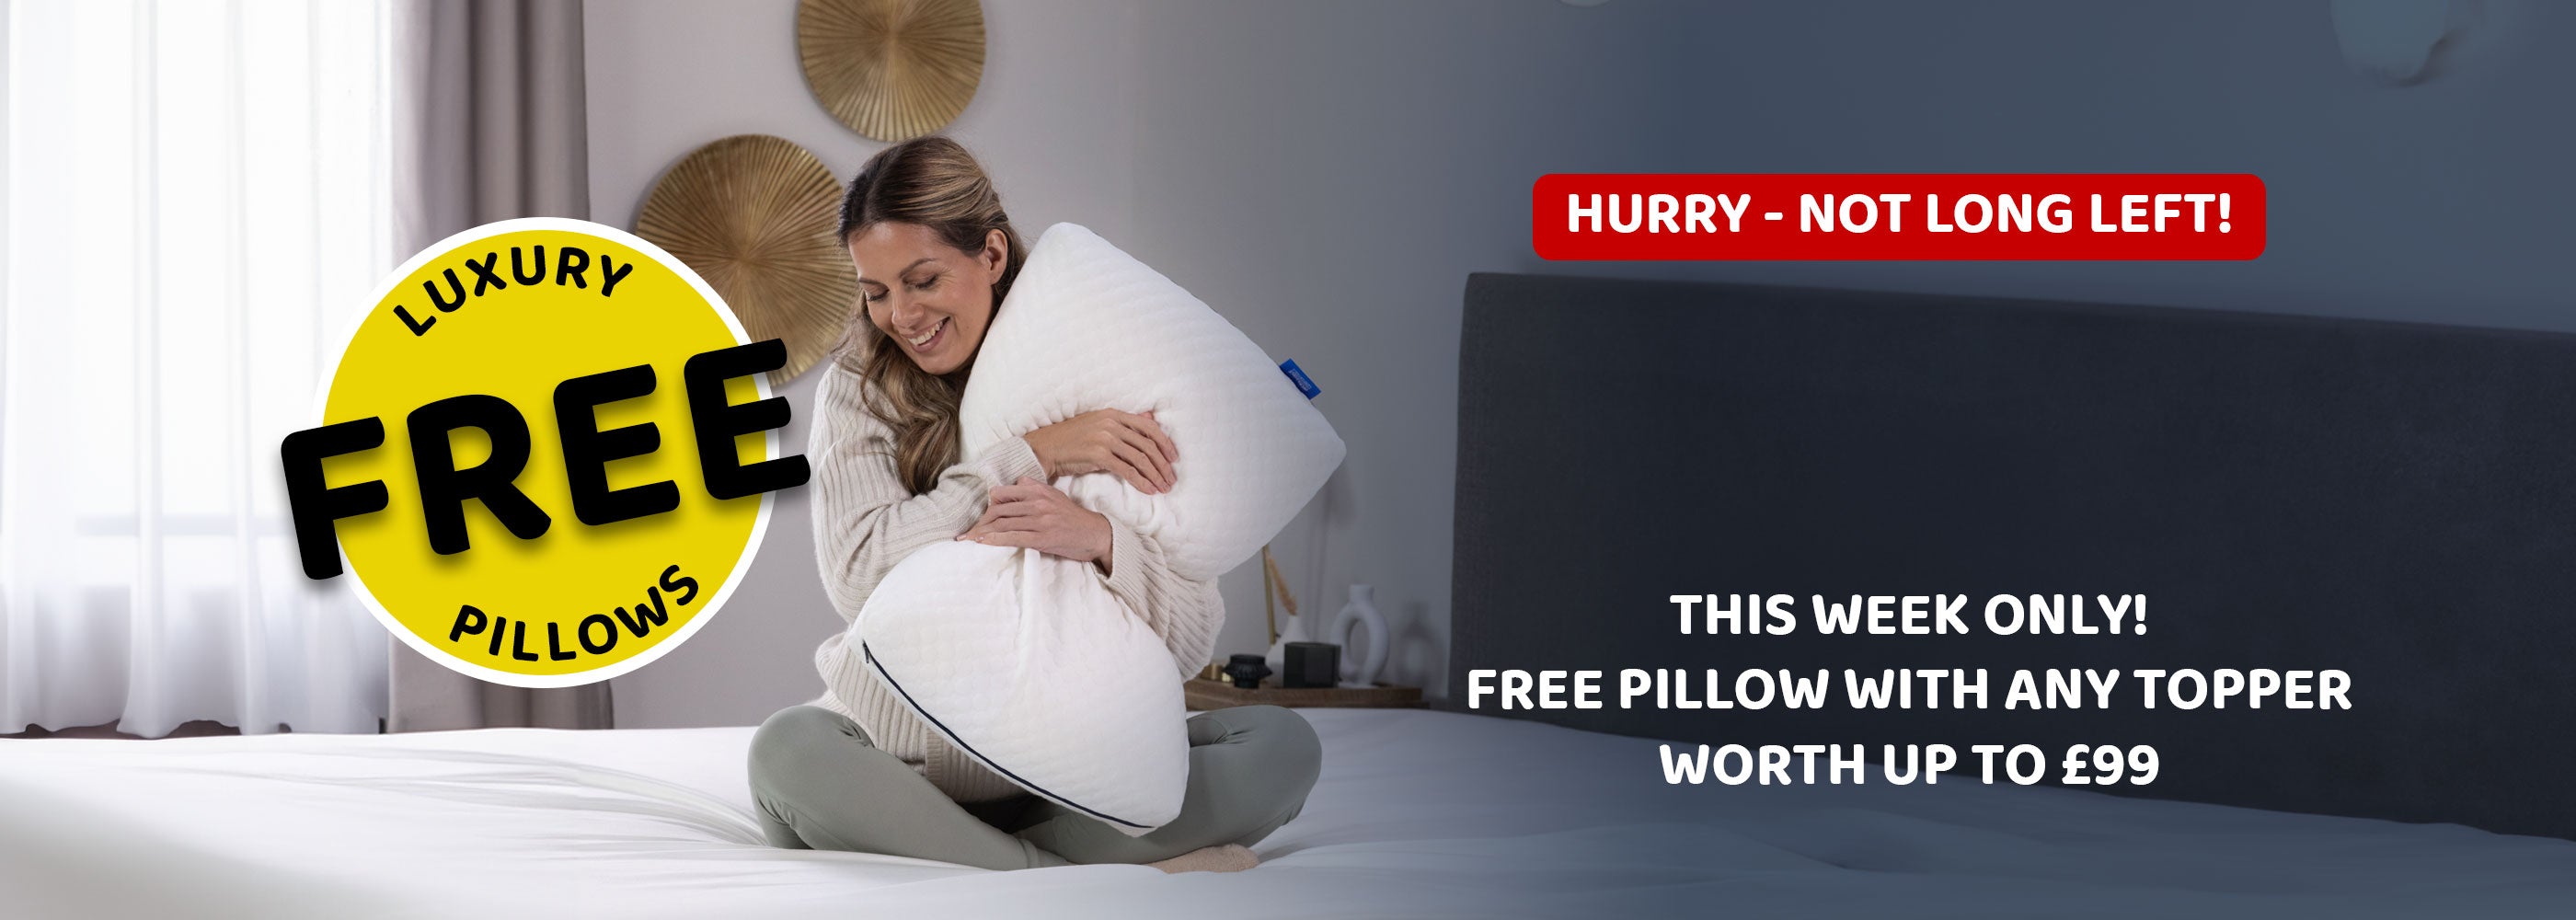 This week only get a free luxury Seriously Comfortable pillow worth up to £99 with any topper 